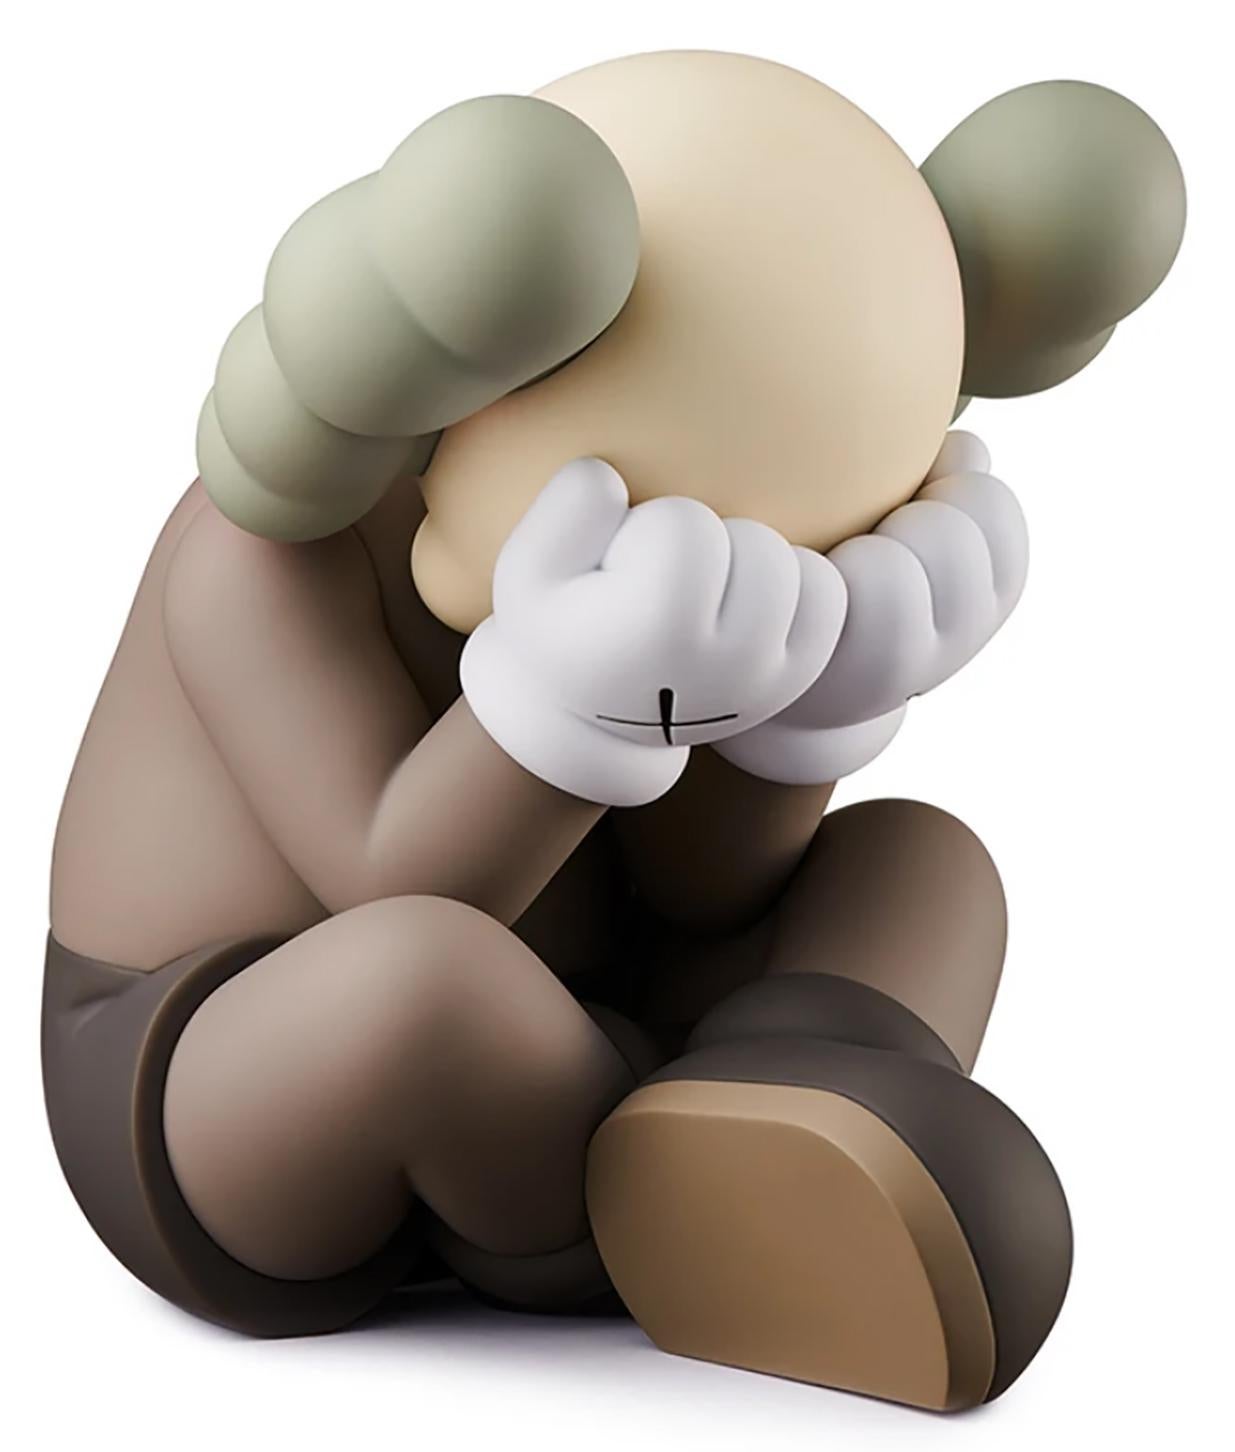 KAWS SEPARATED complete set of 3 works (KAWS Separated Companion set)  For Sale 1